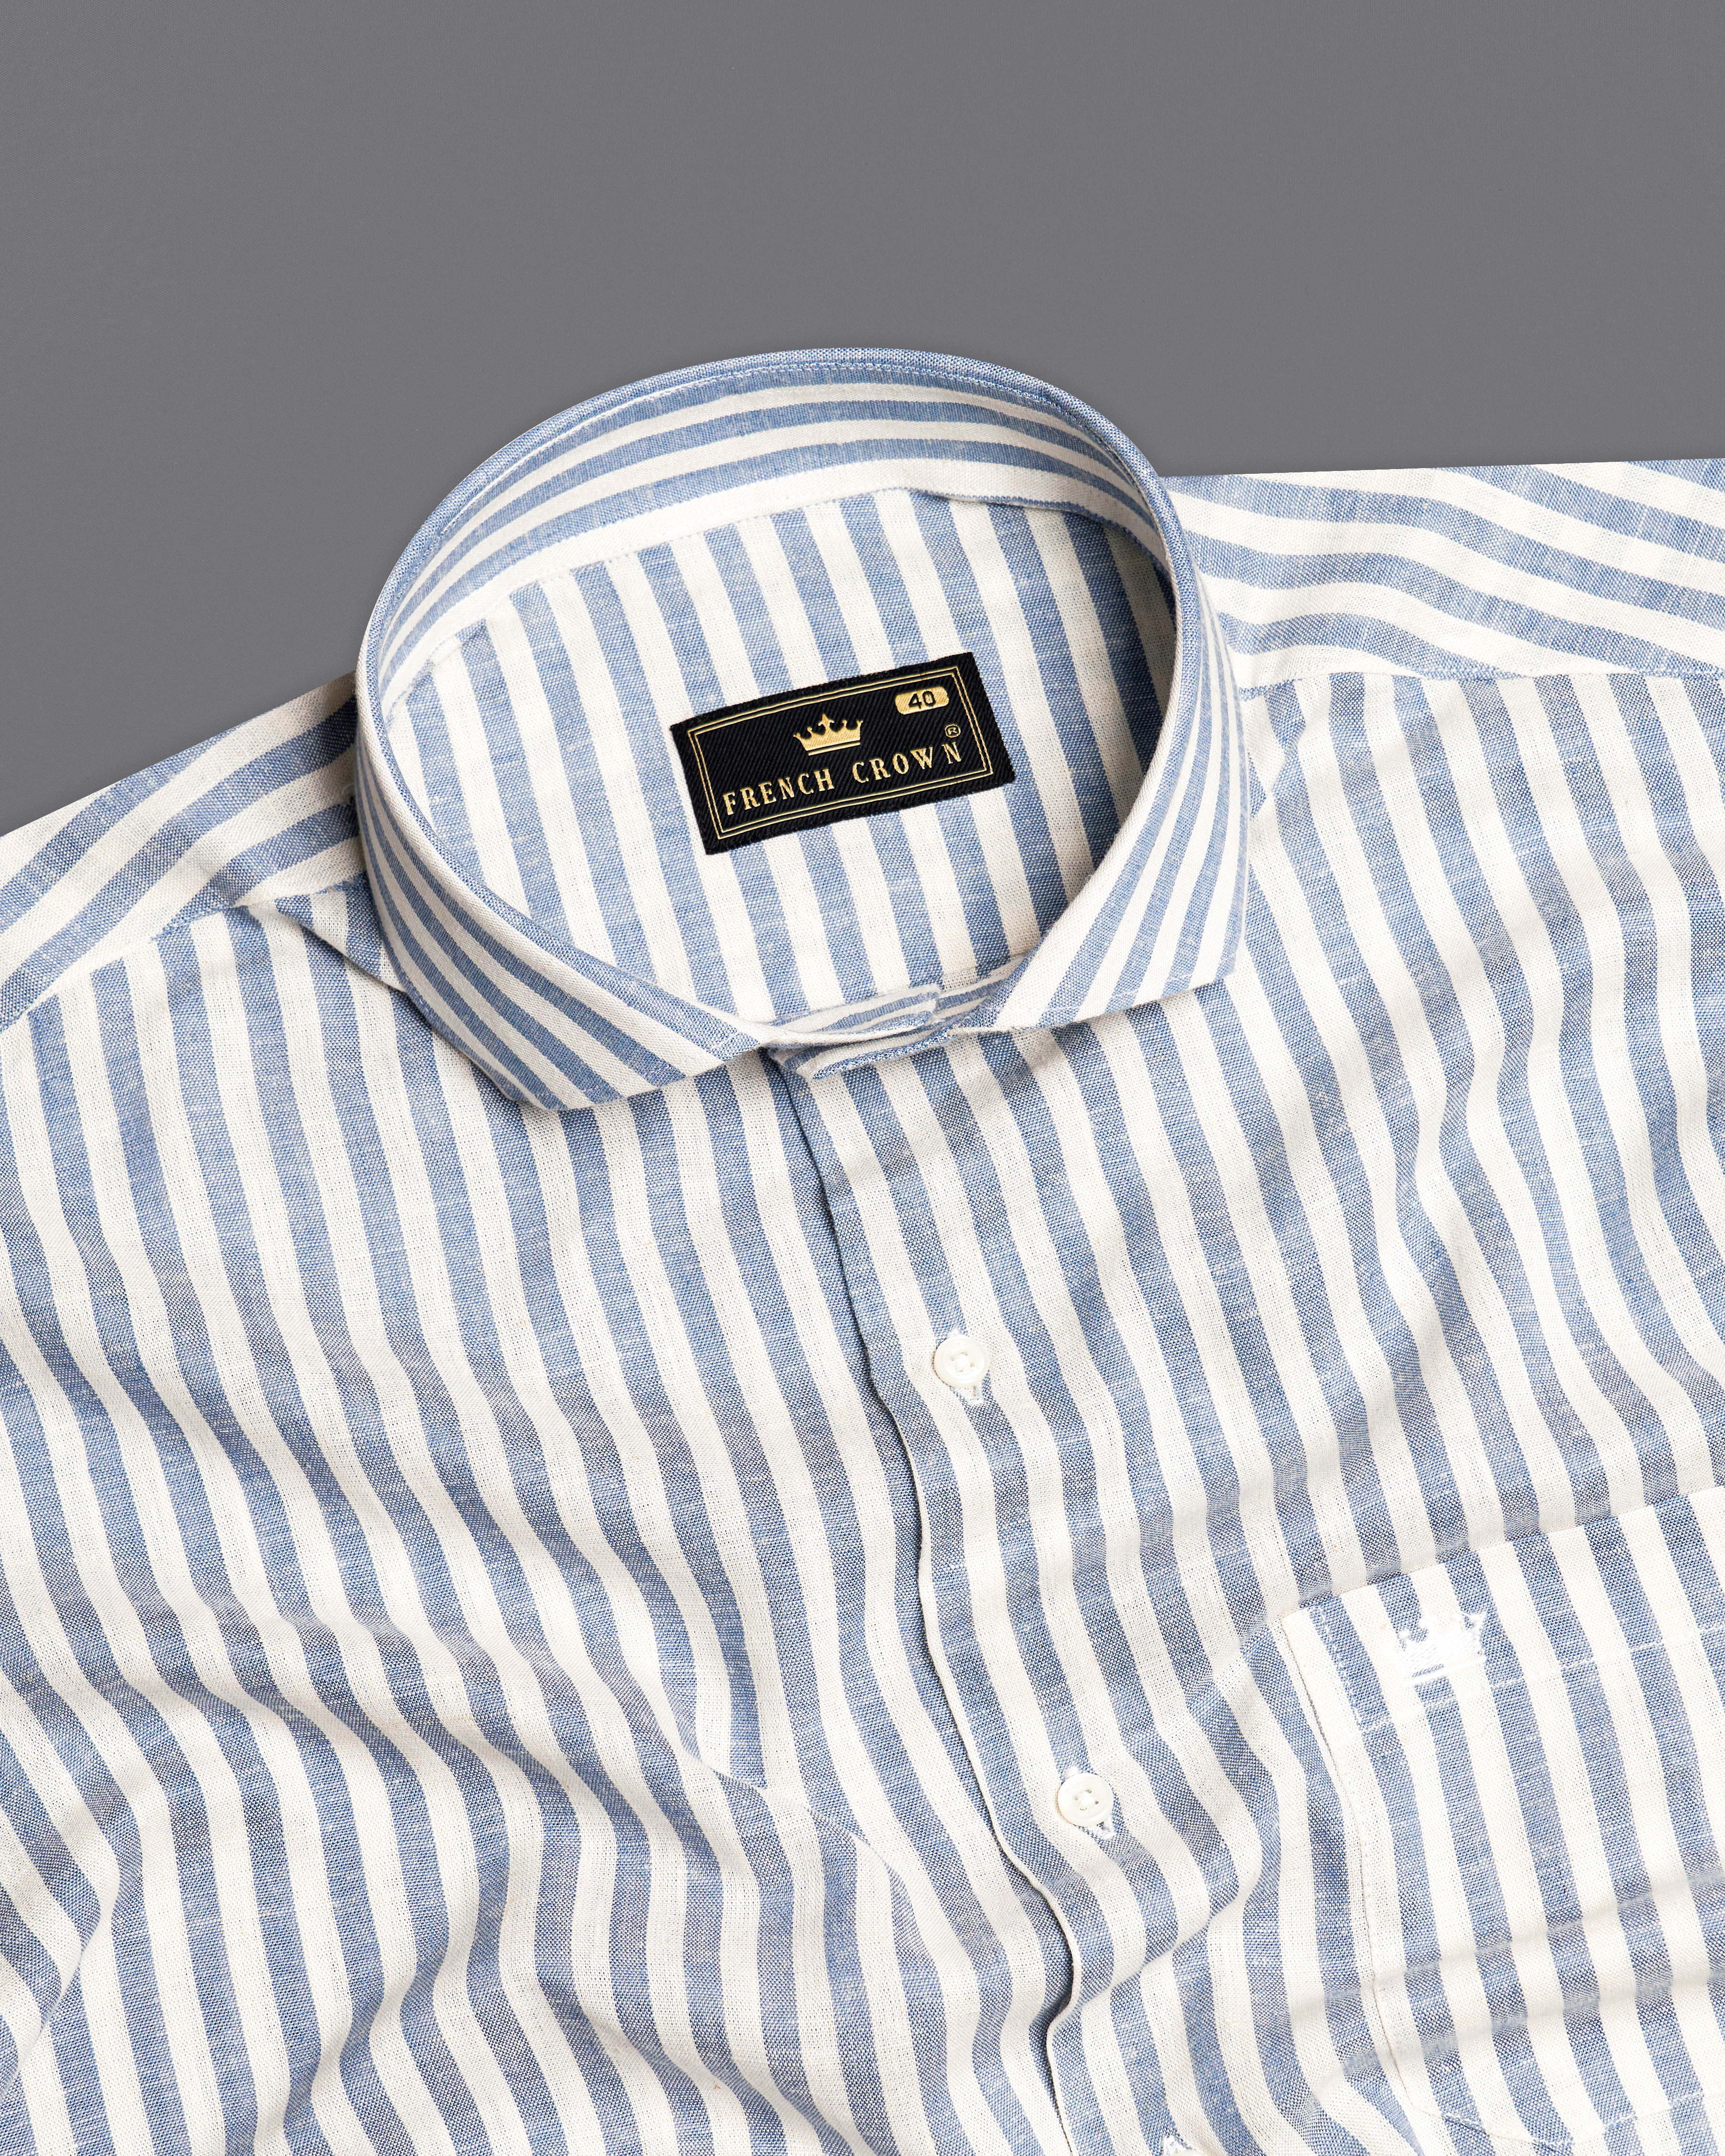 Heather Blue and Off White Striped Luxurious Linen Shirt 9768-CA-38, 9768-CA-H-38, 9768-CA-39, 9768-CA-H-39, 9768-CA-40, 9768-CA-H-40, 9768-CA-42, 9768-CA-H-42, 9768-CA-44, 9768-CA-H-44, 9768-CA-46, 9768-CA-H-46, 9768-CA-48, 9768-CA-H-48, 9768-CA-50, 9768-CA-H-50, 9768-CA-52, 9768-CA-H-52